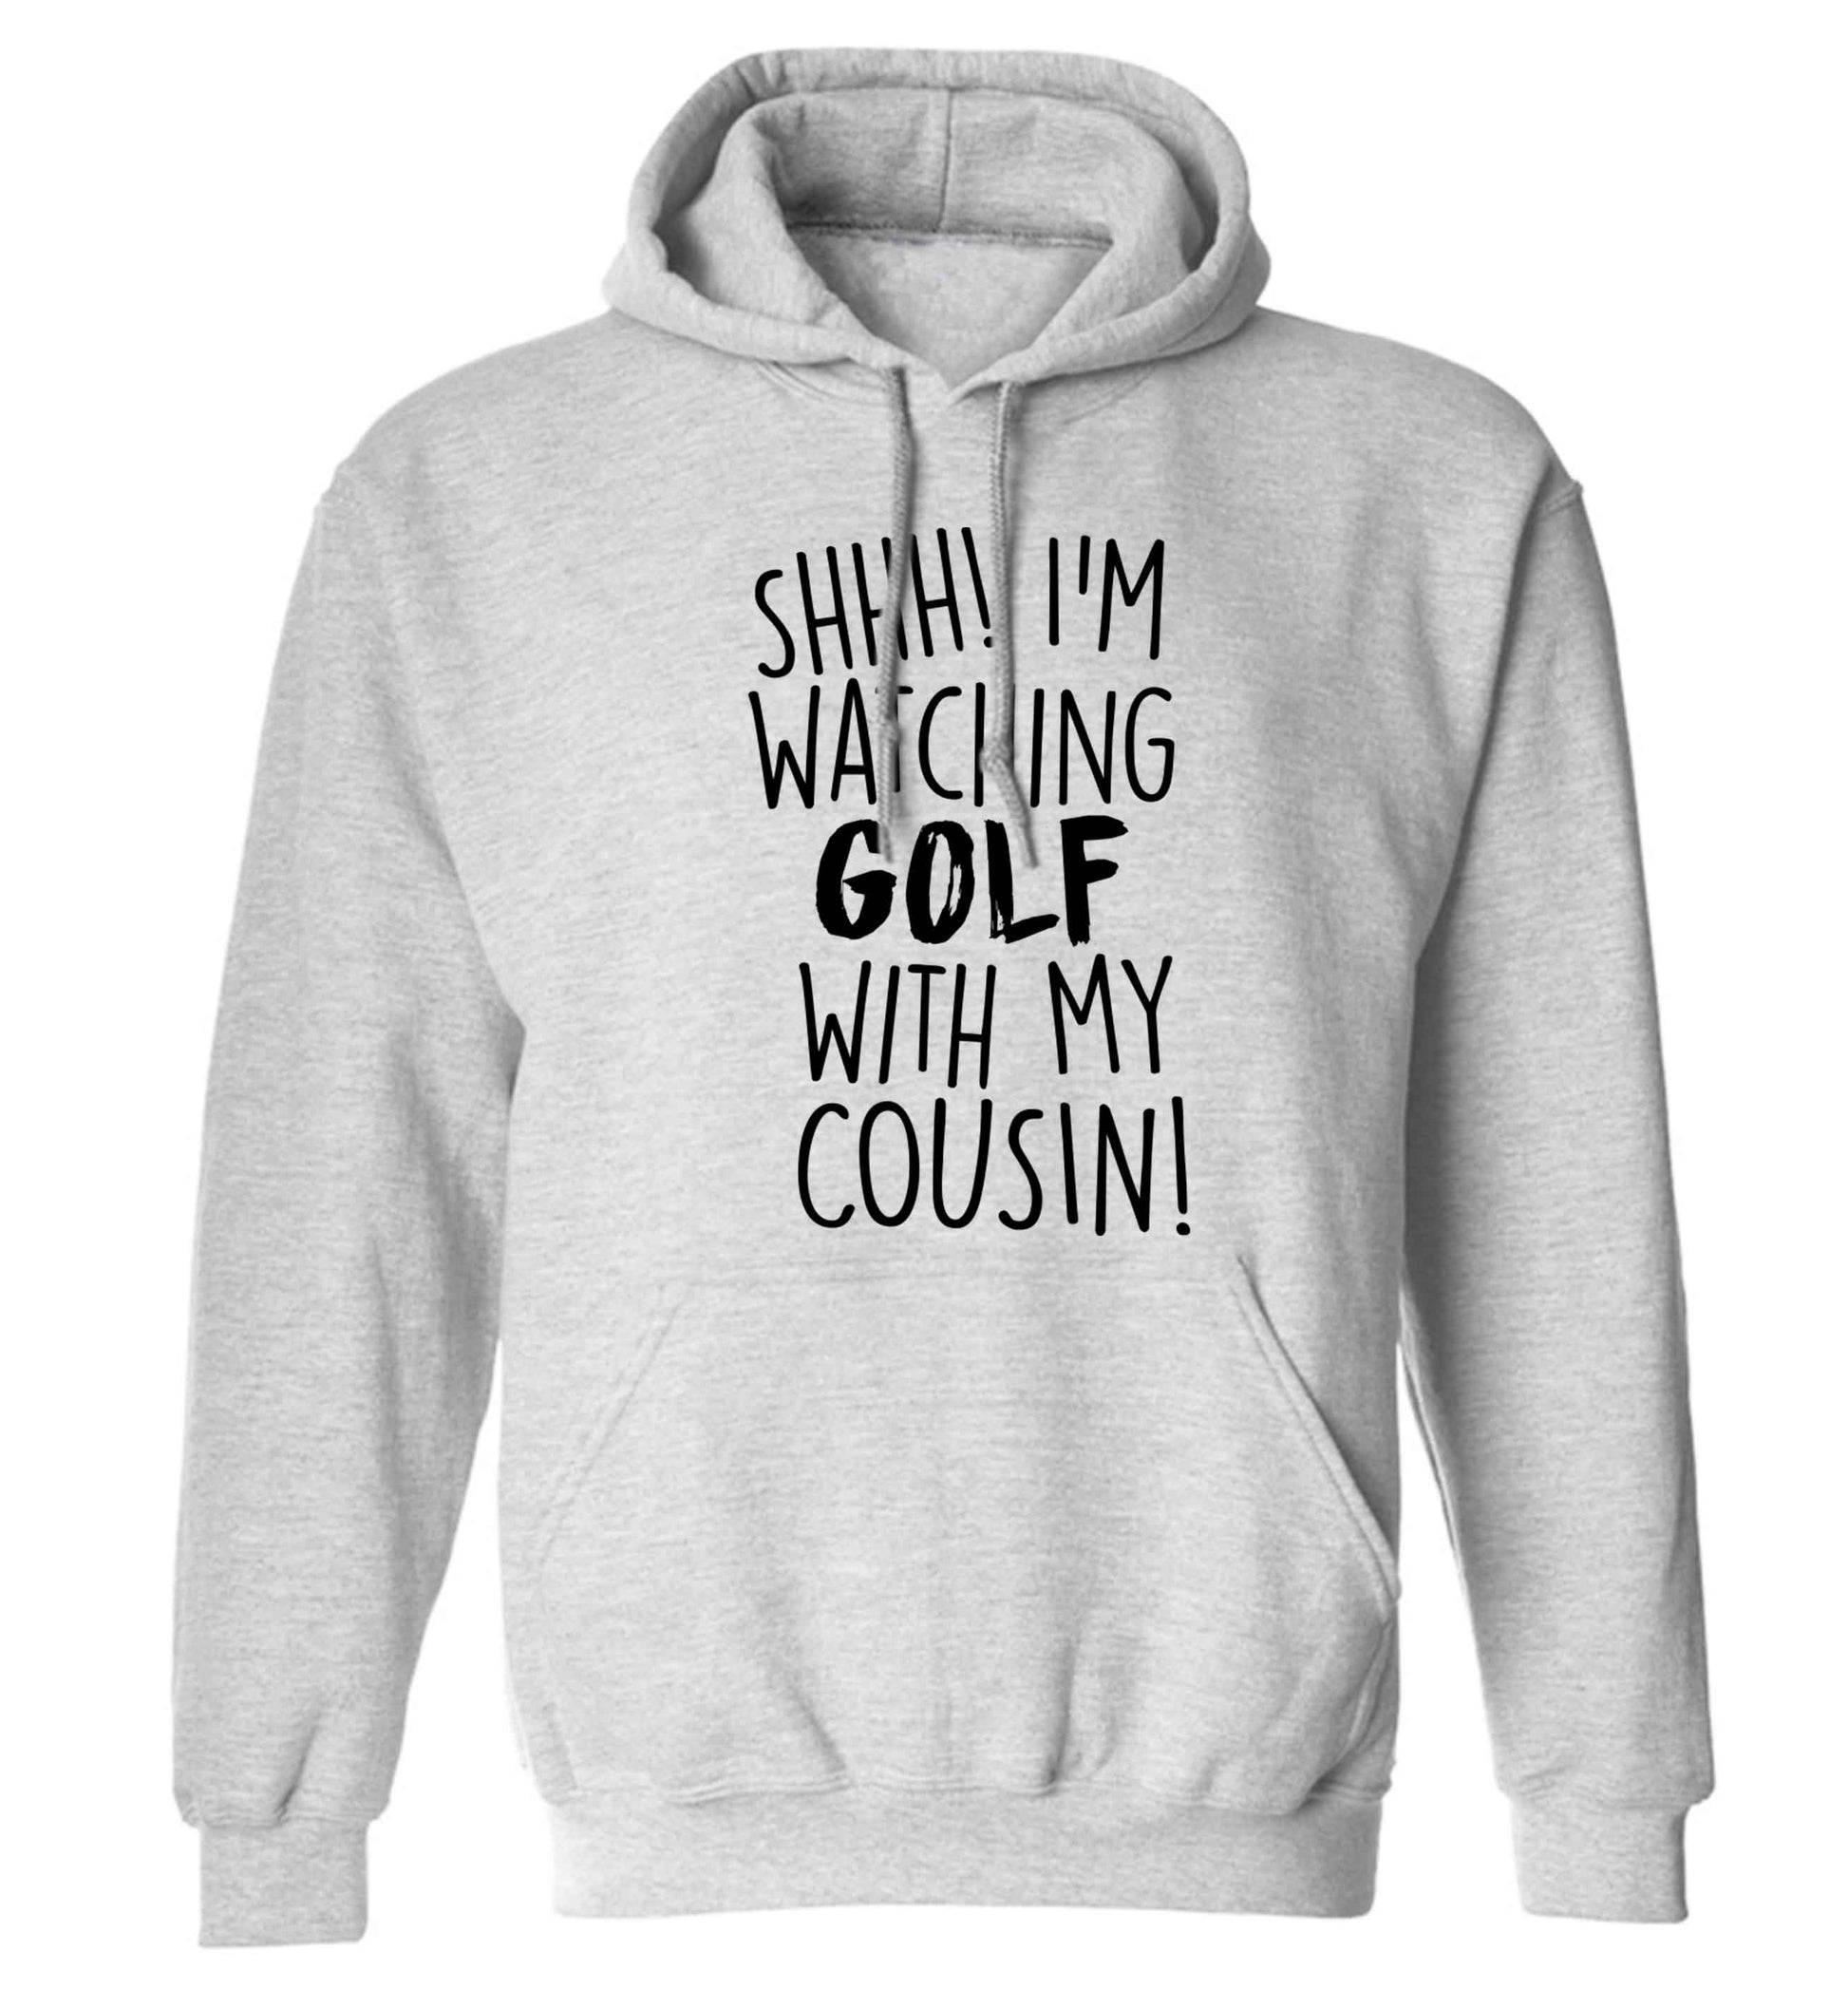 Shh I'm watching golf with my cousin adults unisex grey hoodie 2XL